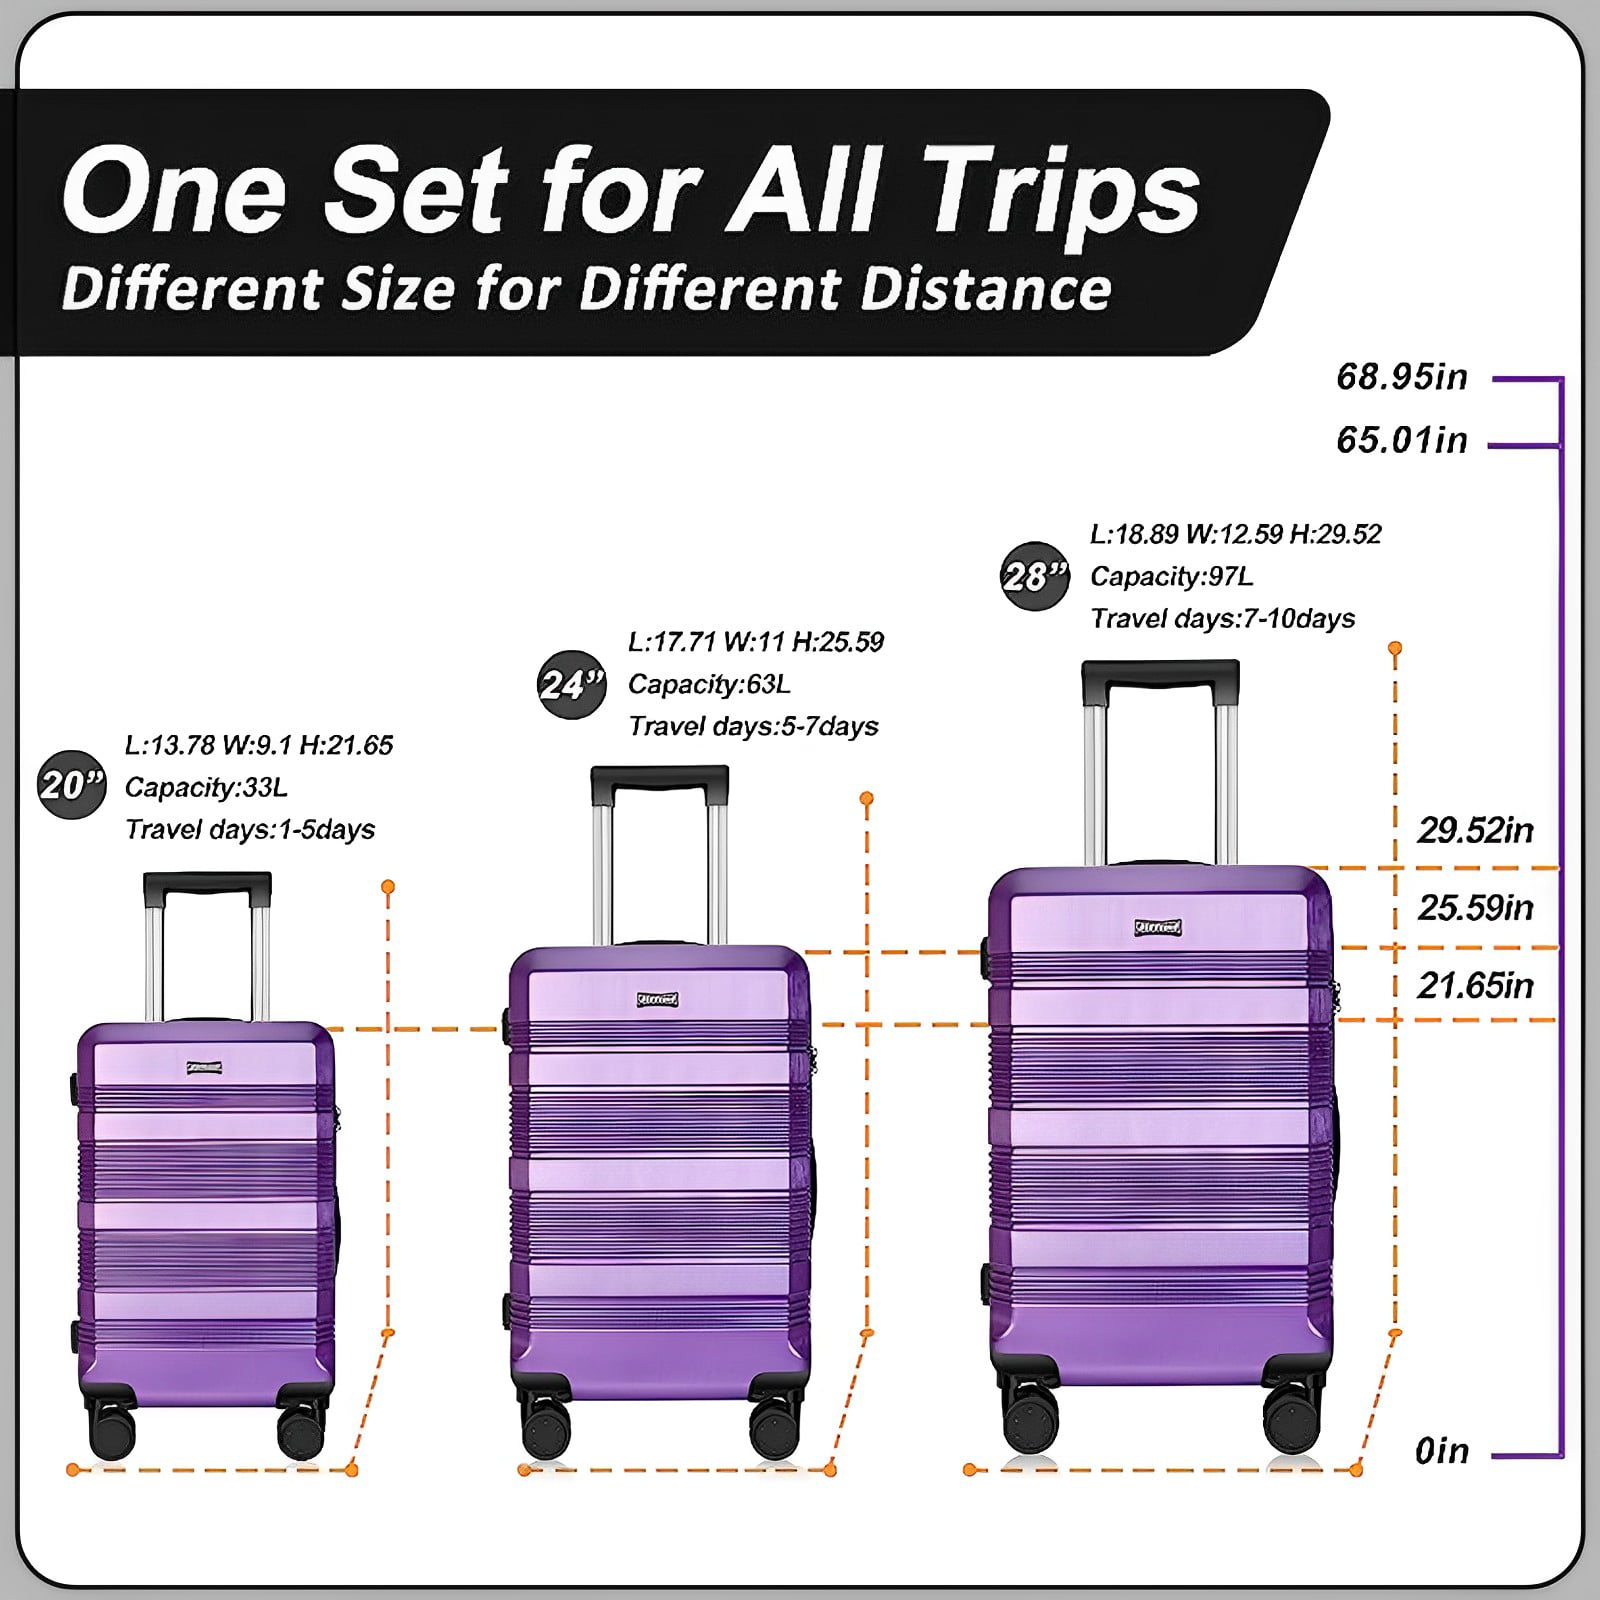 3 Ways Travel Sized Kits Can Help Your Retail Business Soar – Tuel